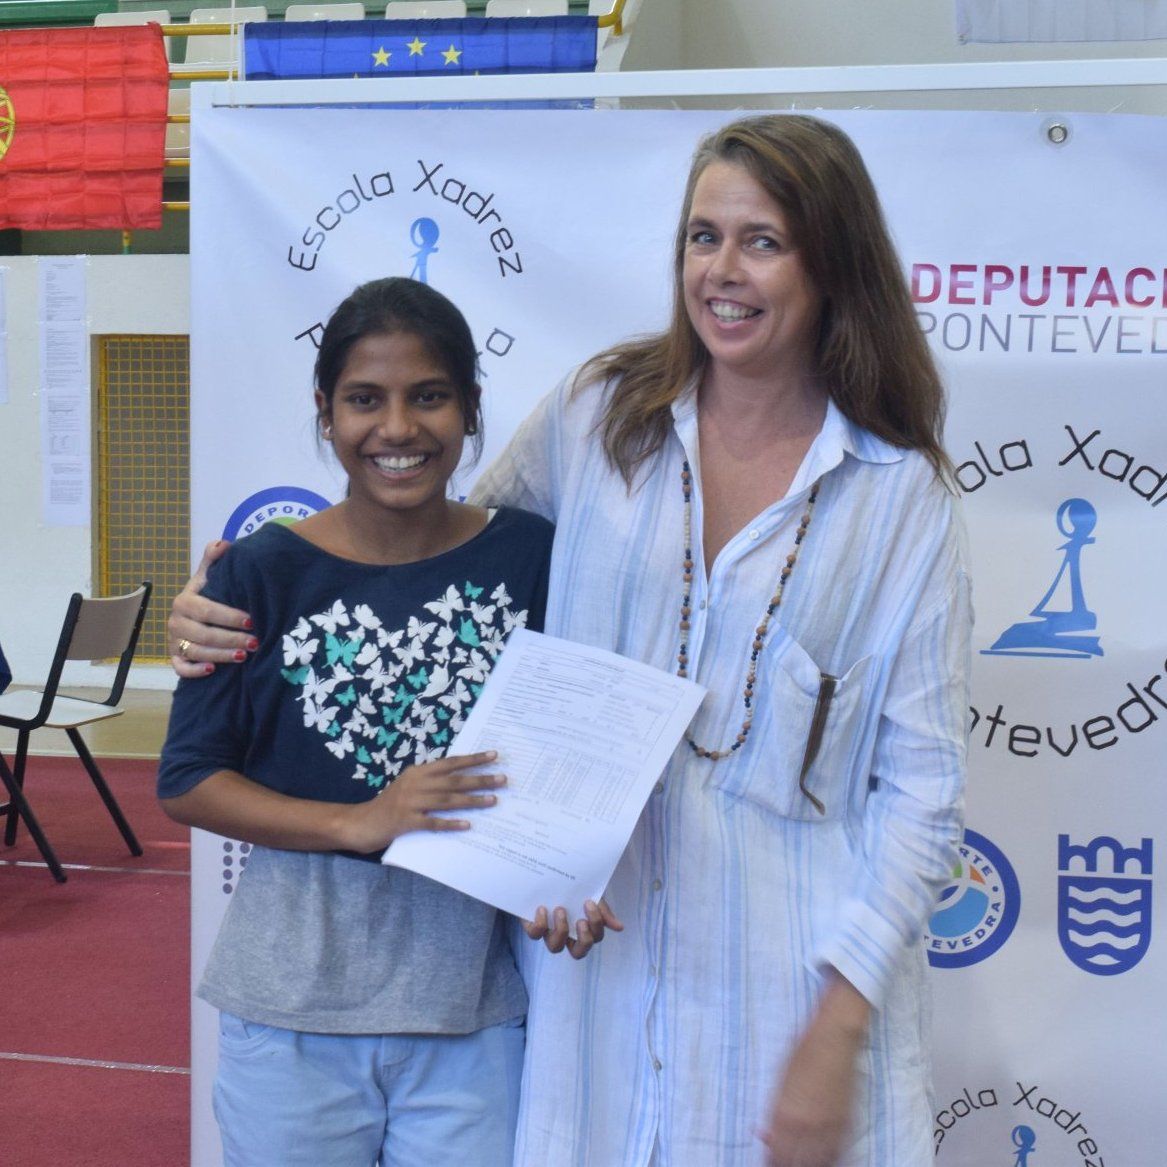 Velpula Sarayu secured three norms and cashed in 1200 euros (around USD 1314). Photo: Official website of Pontevedra Open)